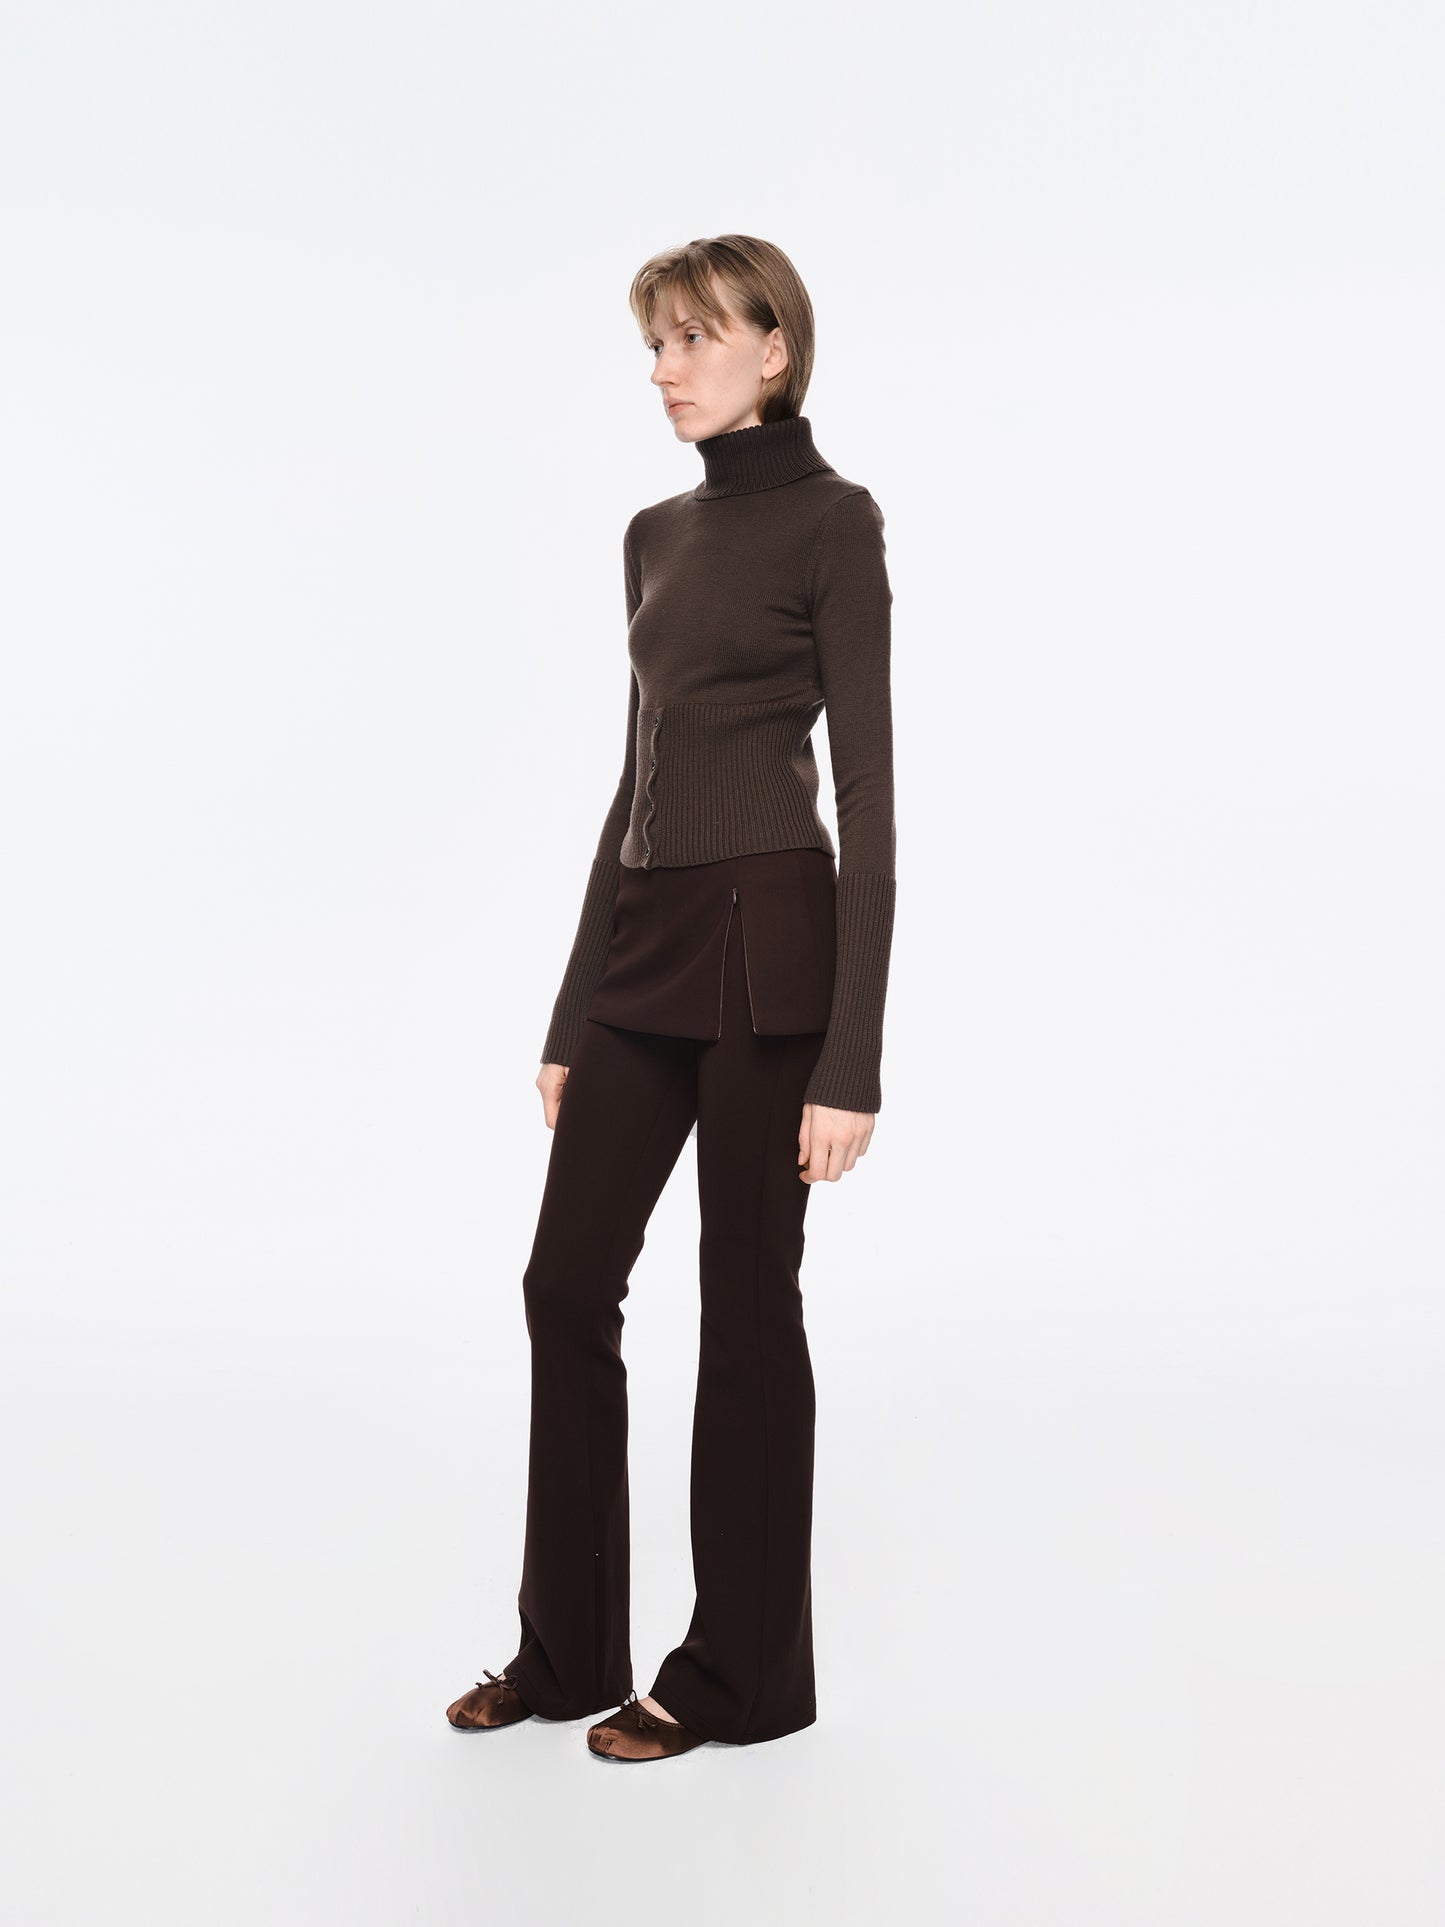 The Half-button High Neck Wool Top